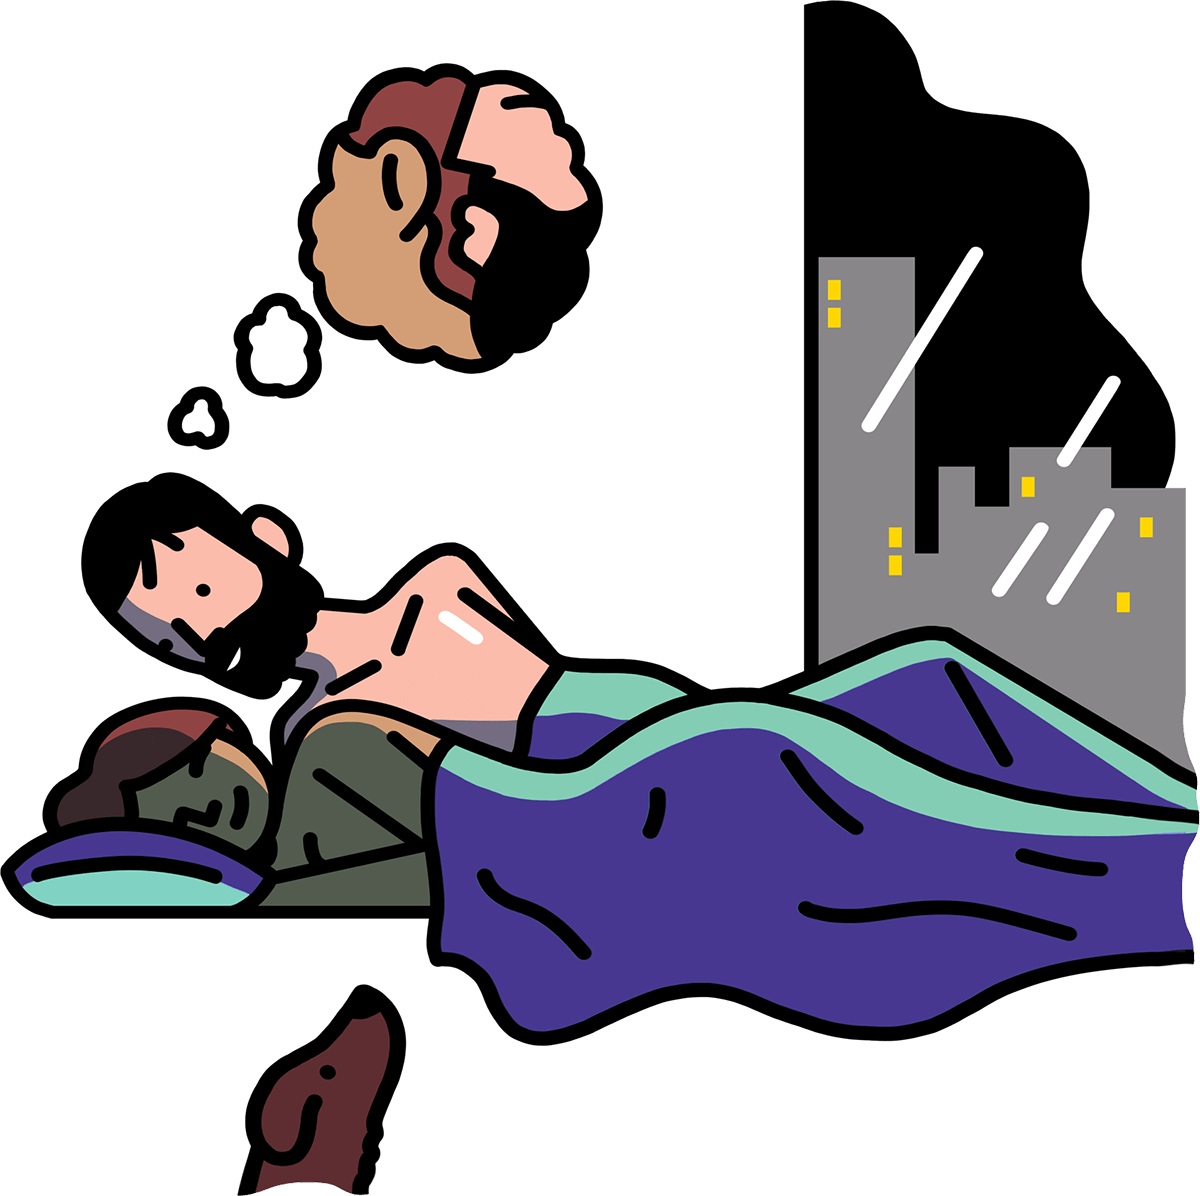 married couple going to sleep in the city